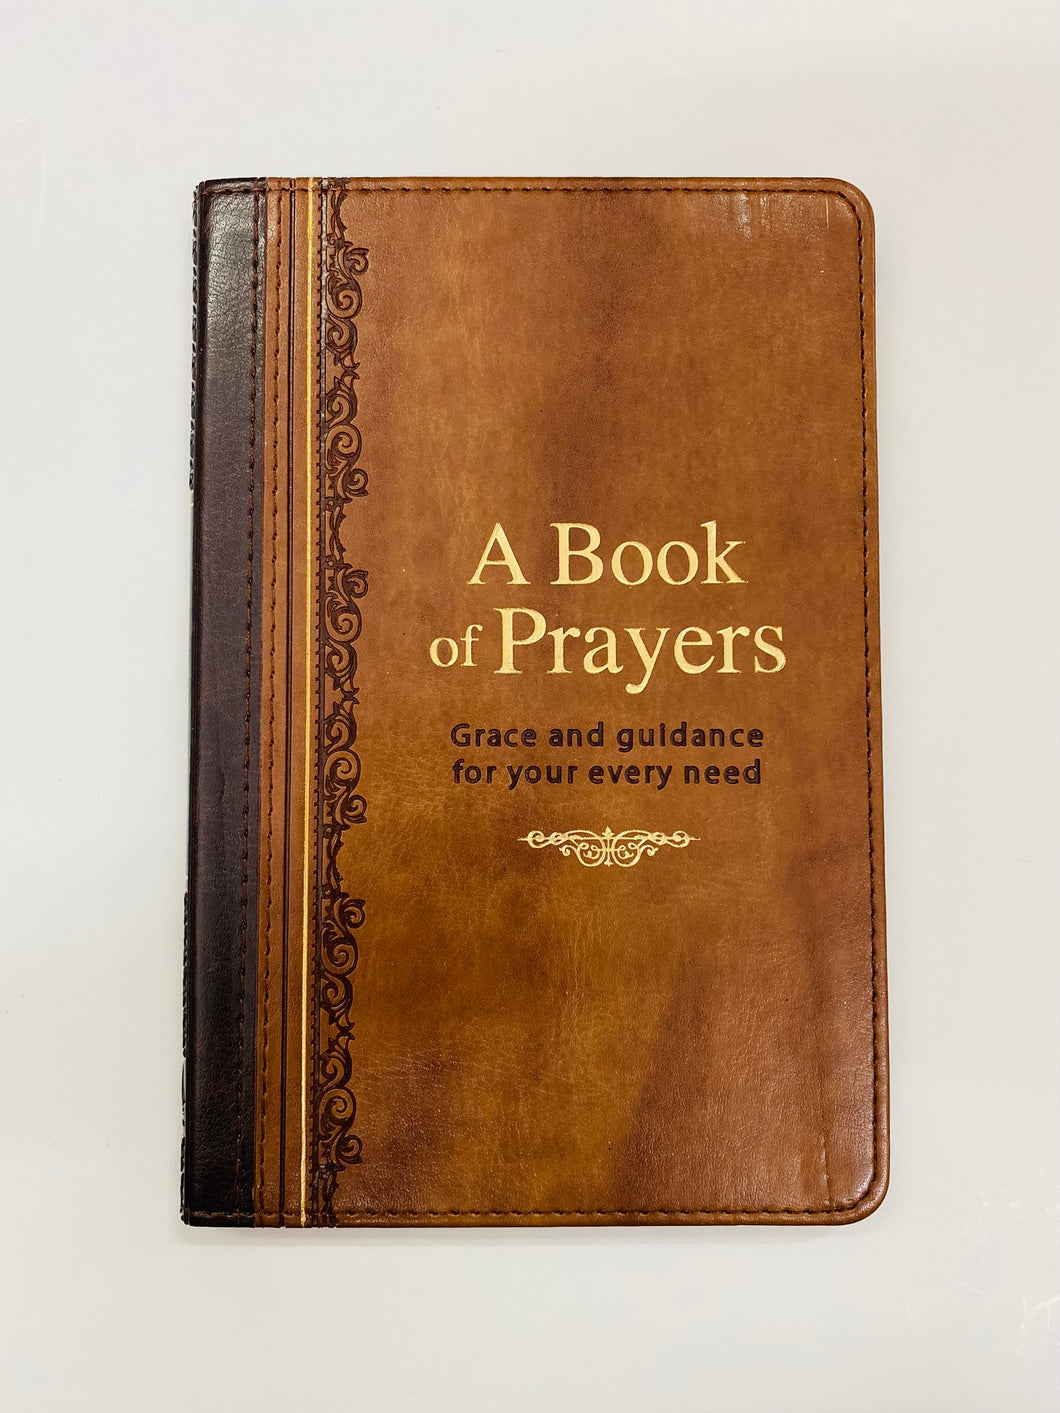 A Book of Prayers: Grace and Guidance for your Every Need